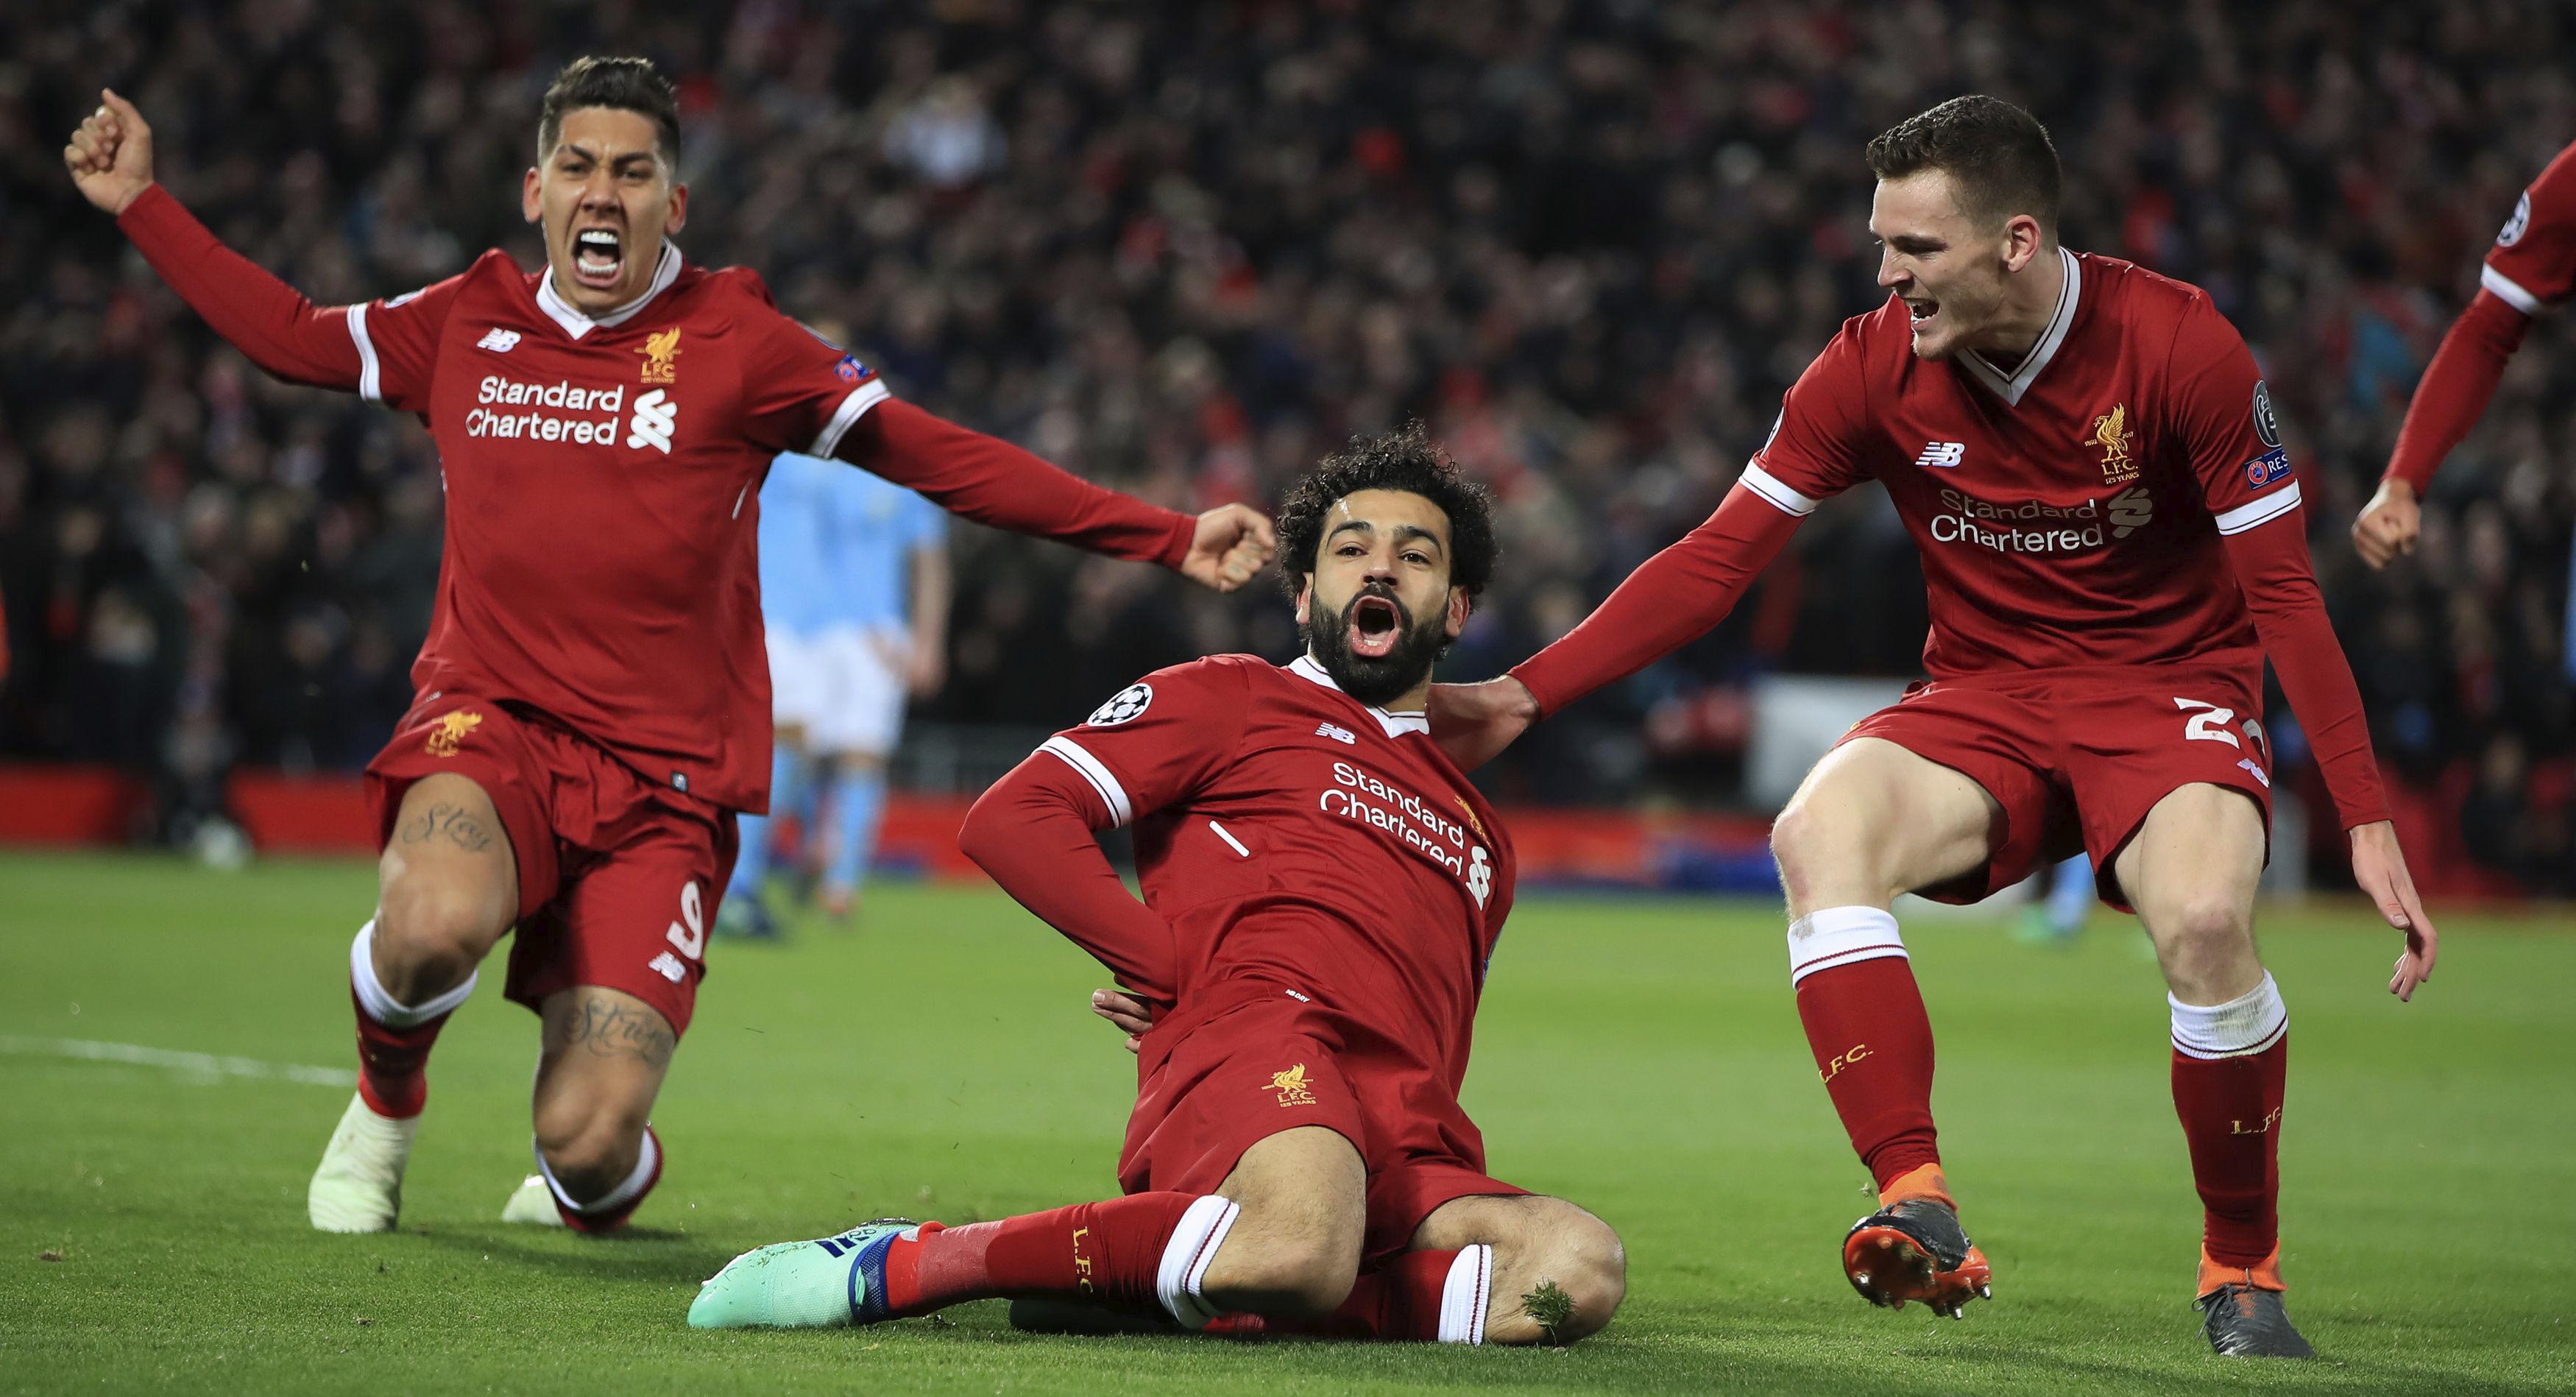 Liverpool blows away Man City in 3-0 win in UCL quarterfinals | The Spokesman-Review3500 x 1898